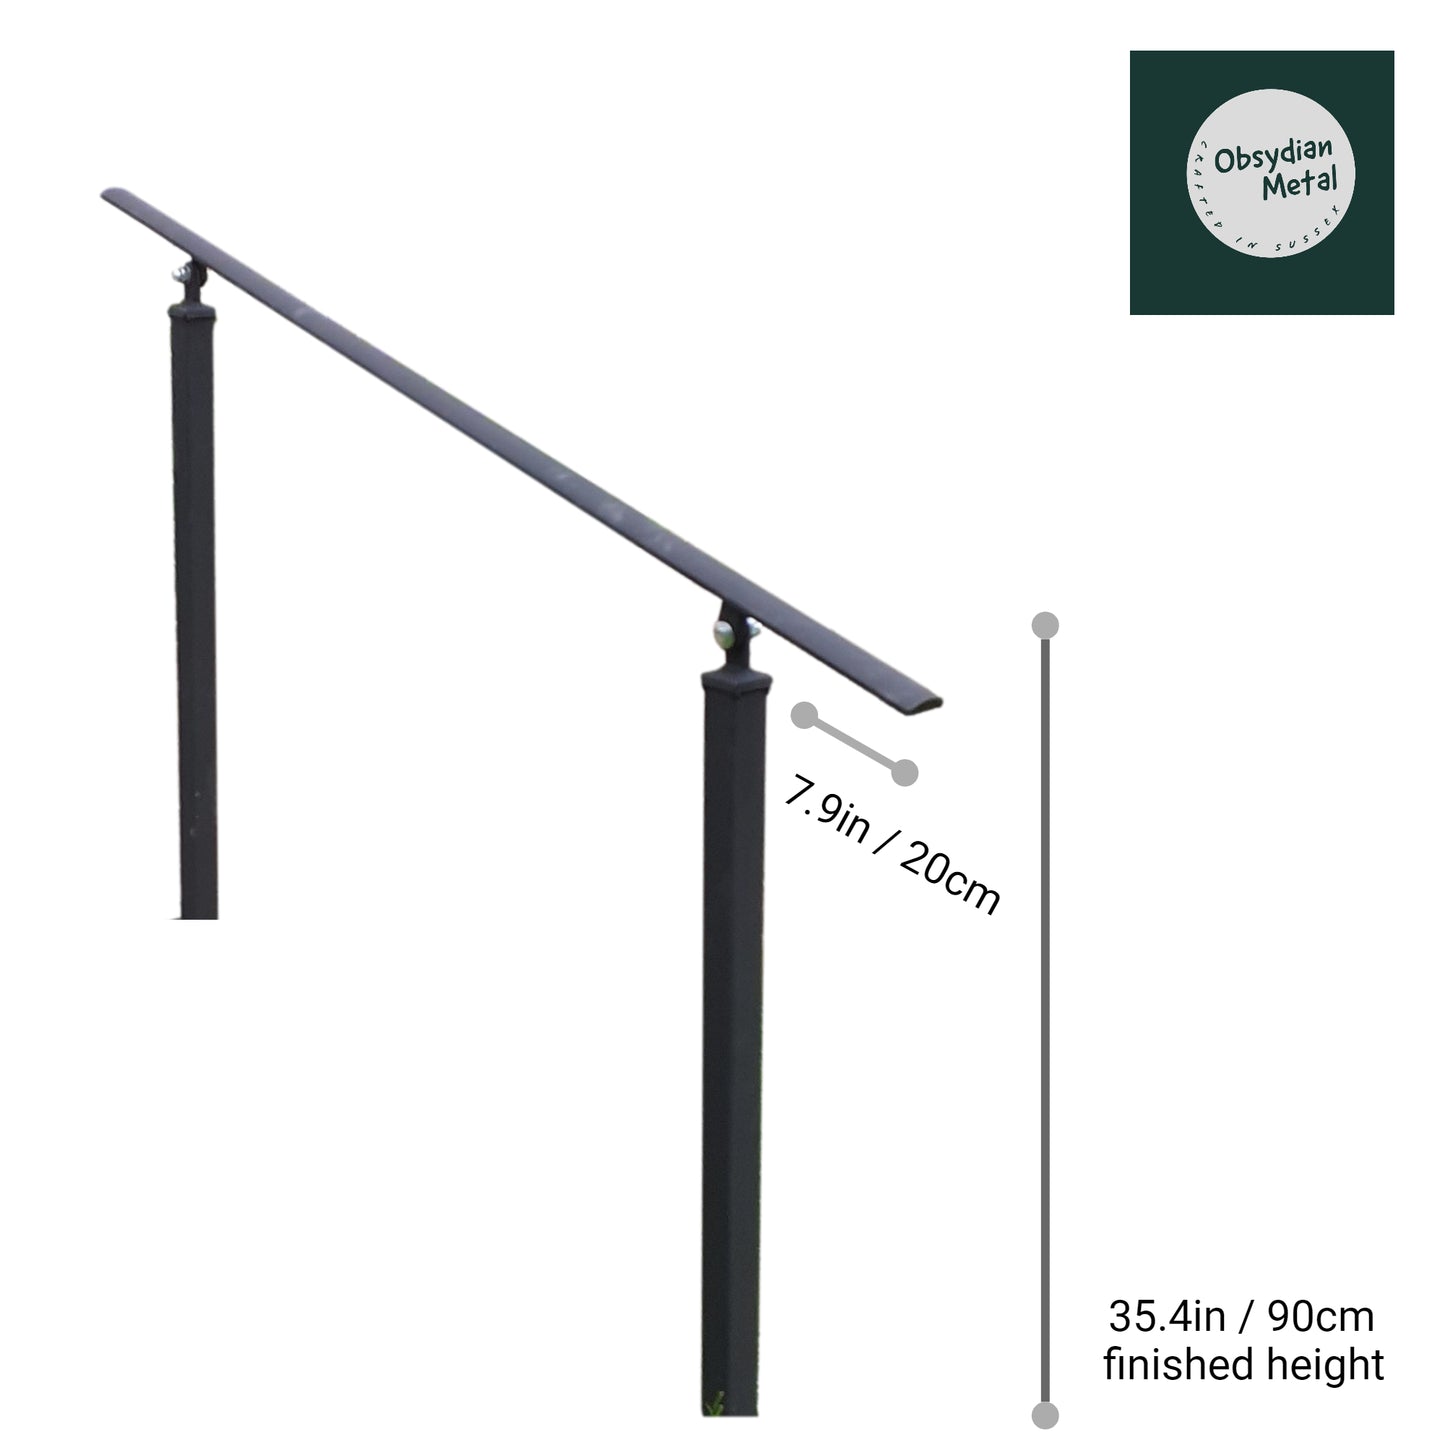 Wrought Iron Atara Handrail on Two Concrete In Posts - 1m - 2.4m